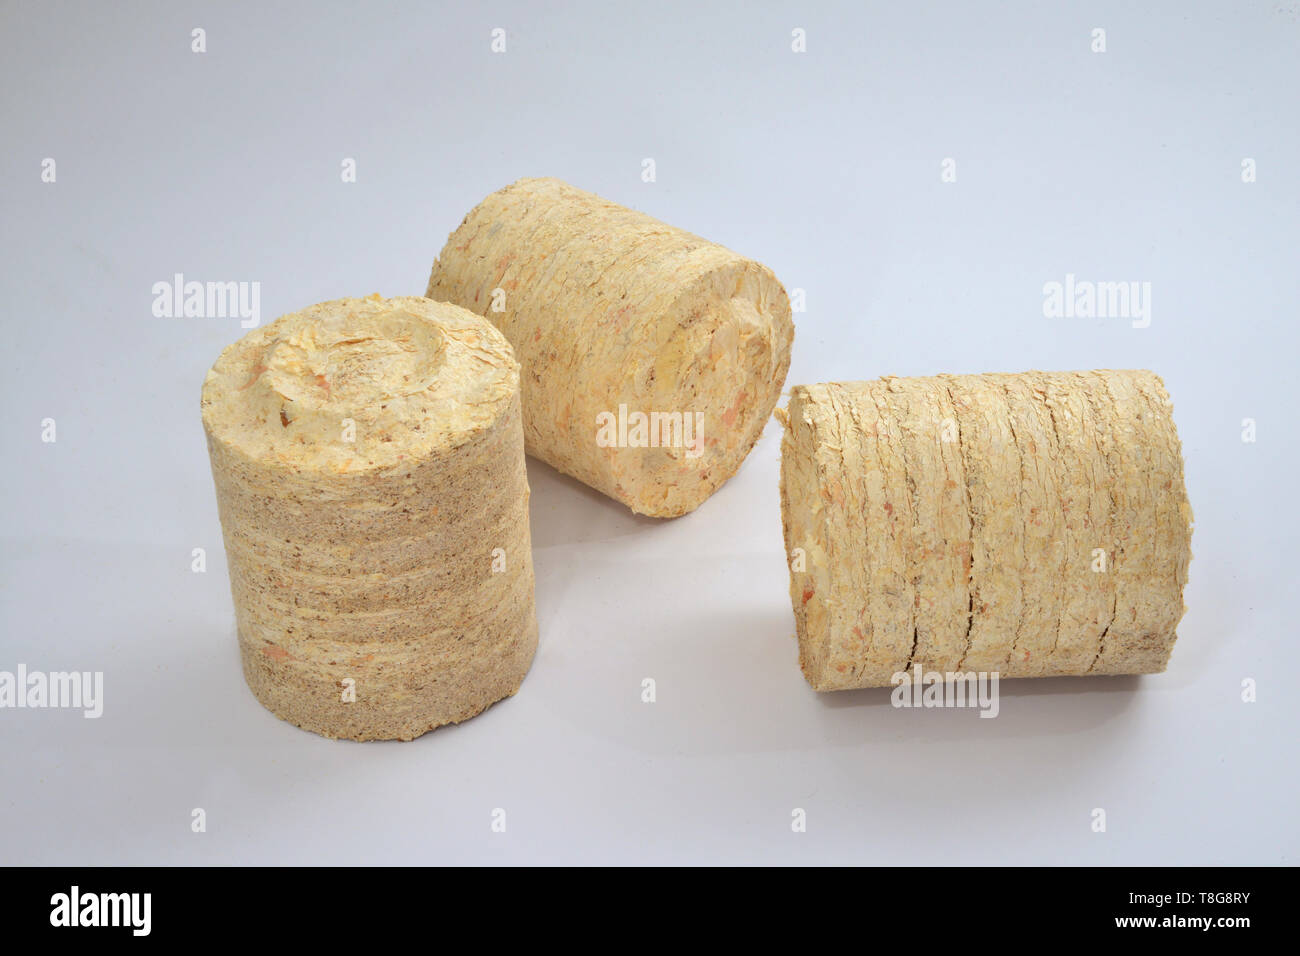 Three thick wood pellets, as used in large combustion plants. Studio picture against a white background Stock Photo